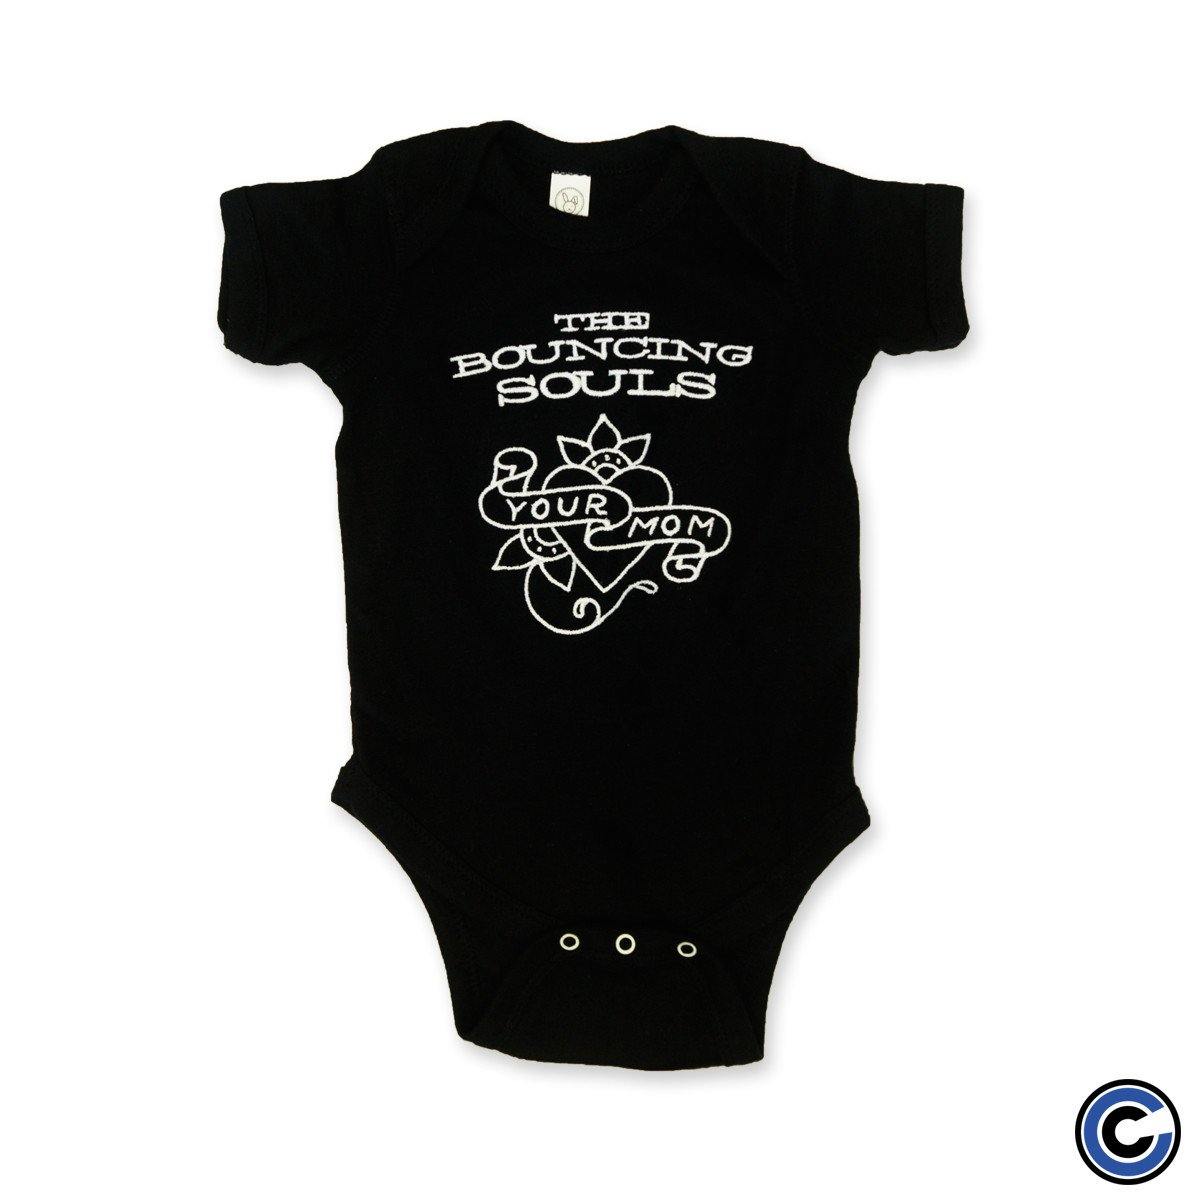 Buy – The Bouncing Souls "Your Mom" Onesie – Band & Music Merch – Cold Cuts Merch